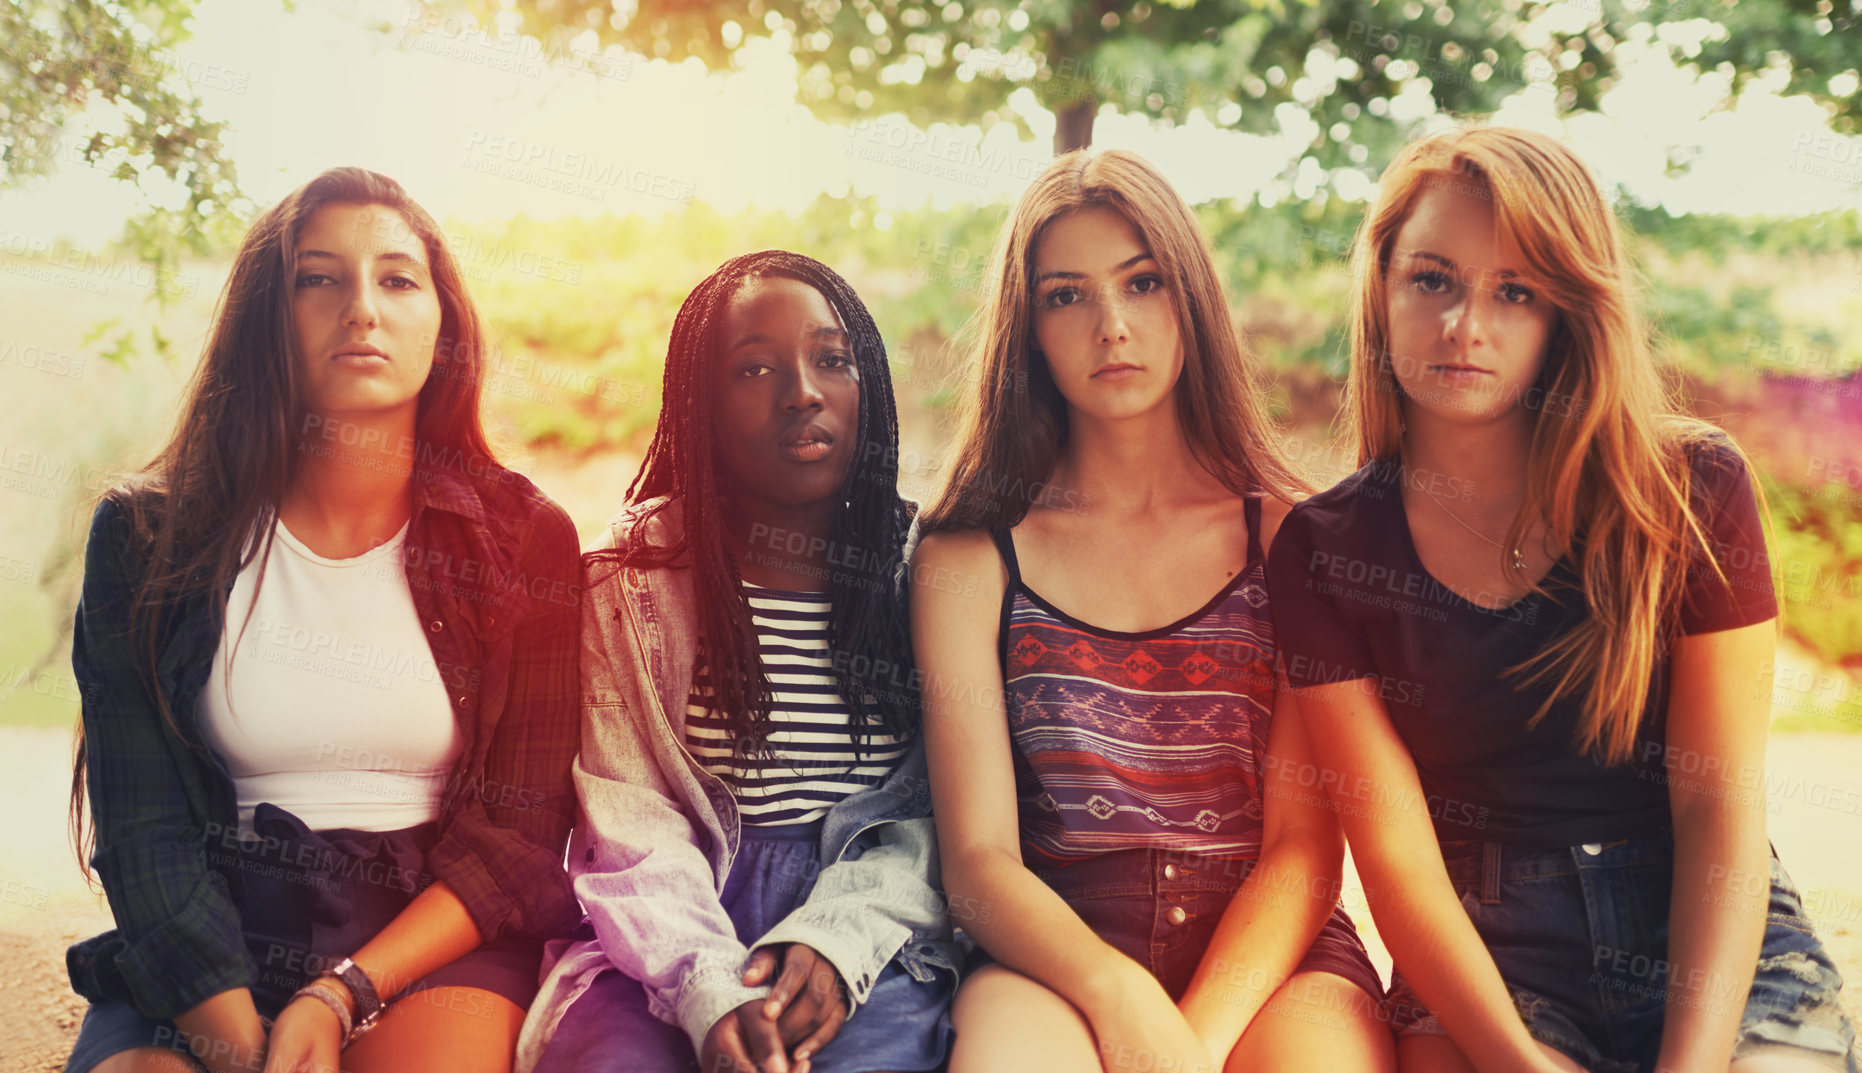 Buy stock photo A group of displeased looking teenage girls sitting outdoors